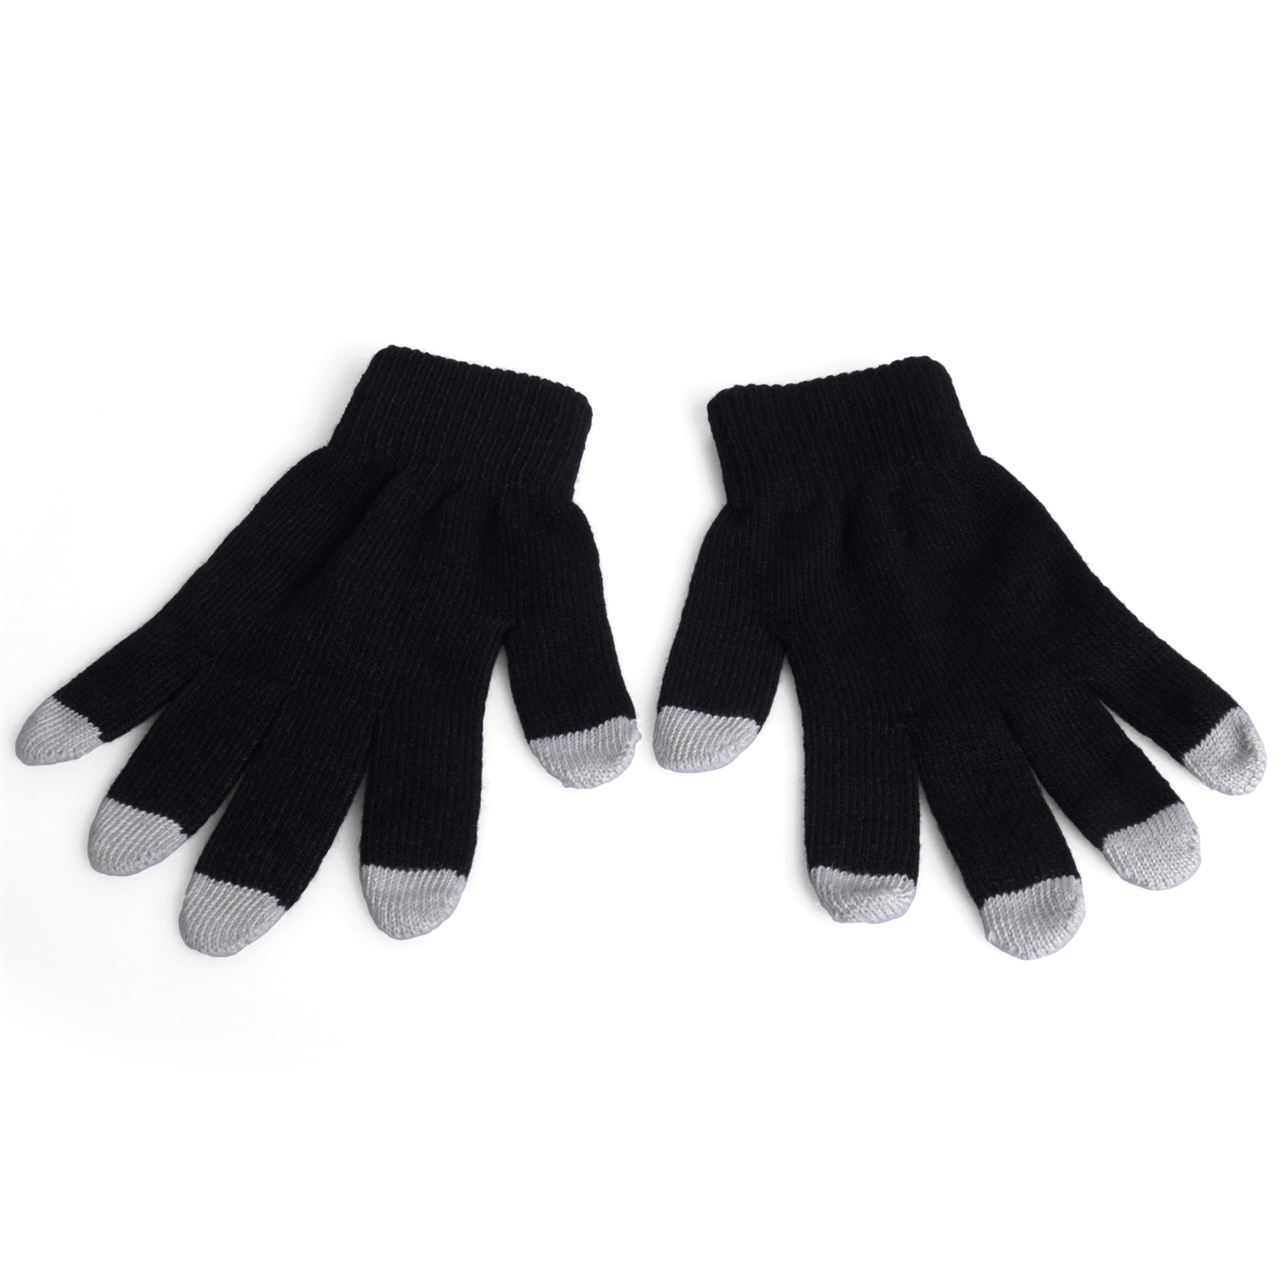 YouSave Accessories Touch Screen Gloves - Black with Grey Tips